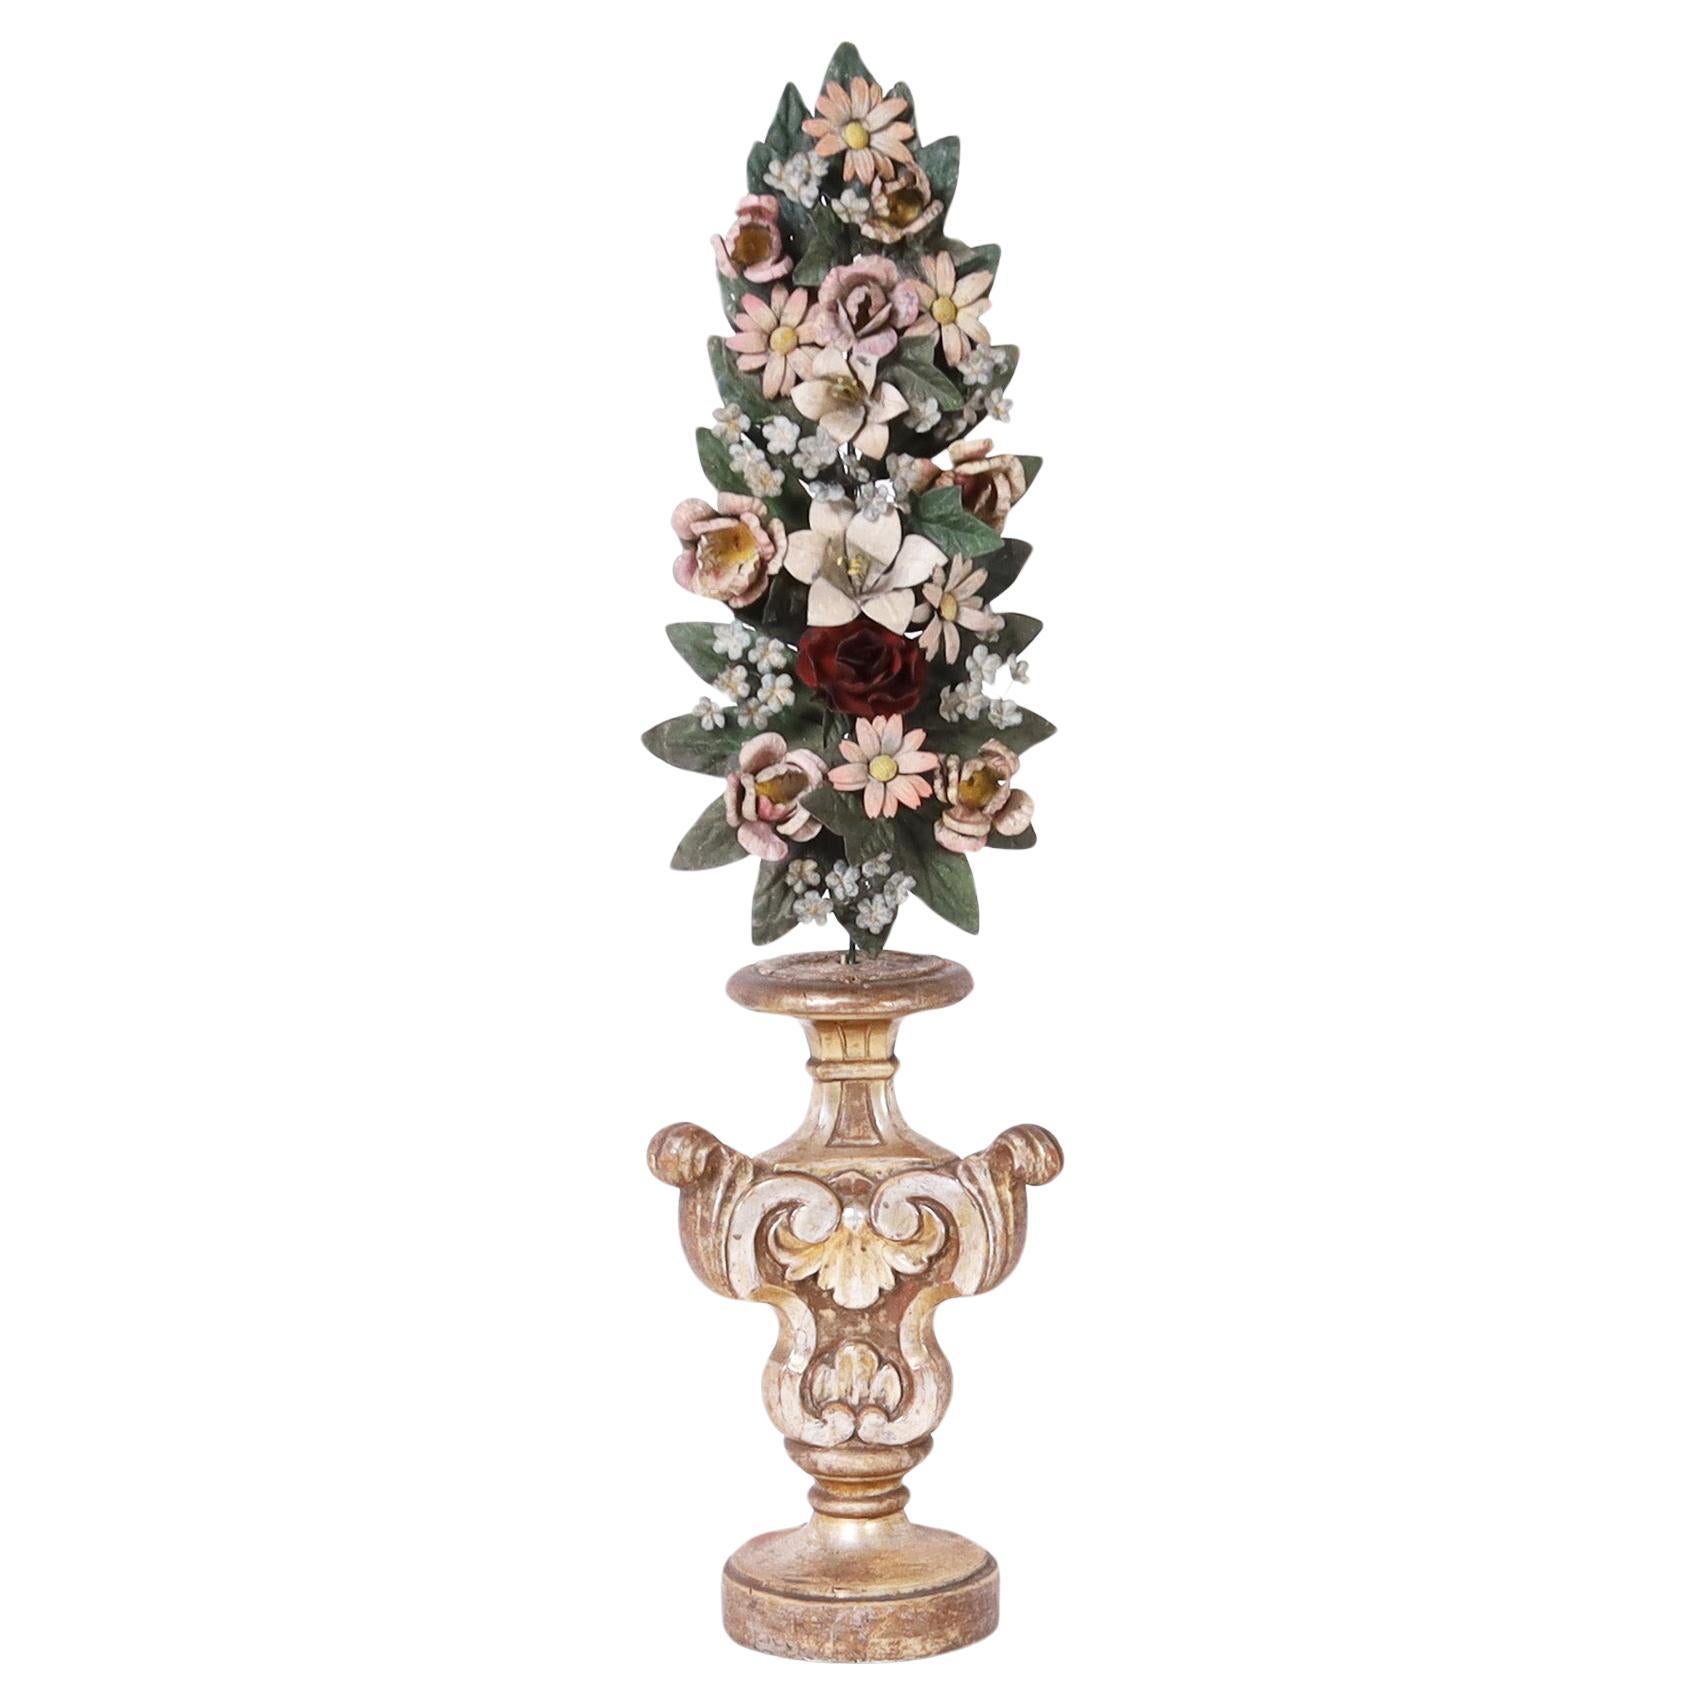 Antique Italian Neoclassic Wood Stand with Tole Flowers